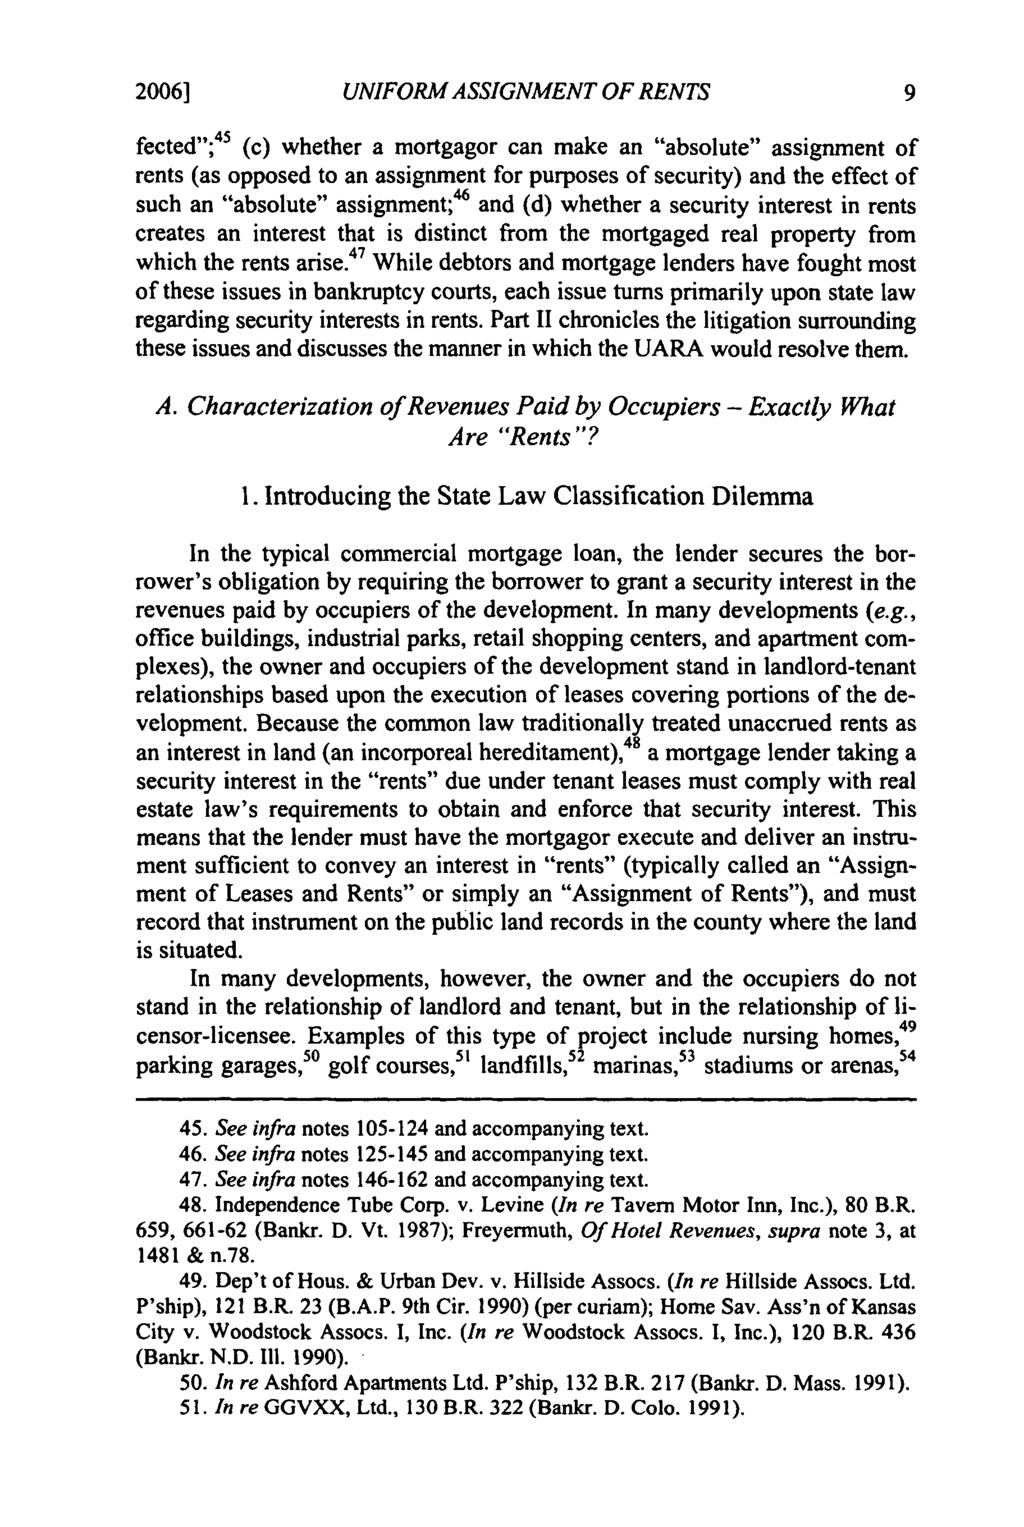 20061 Freyermuth: Freyermuth: Modernizing Security in Rents UNIFORM ASSIGNMENT OF RENTS fected"; 45 (c) whether a mortgagor can make an "absolute" assignment of rents (as opposed to an assignment for